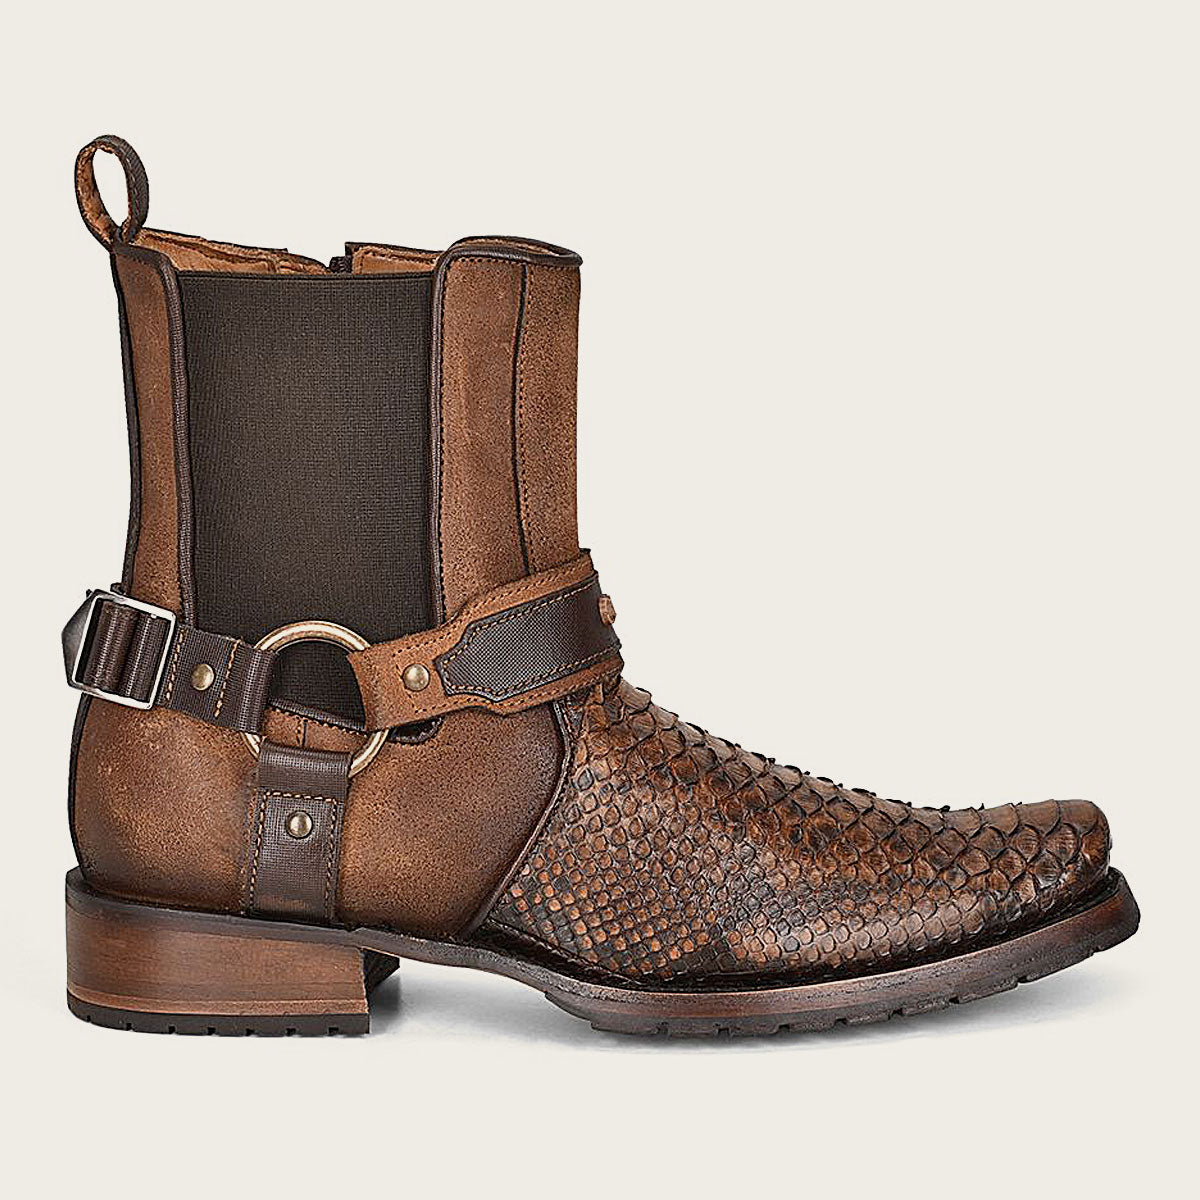 Brown mens boots hand-painted on python leather